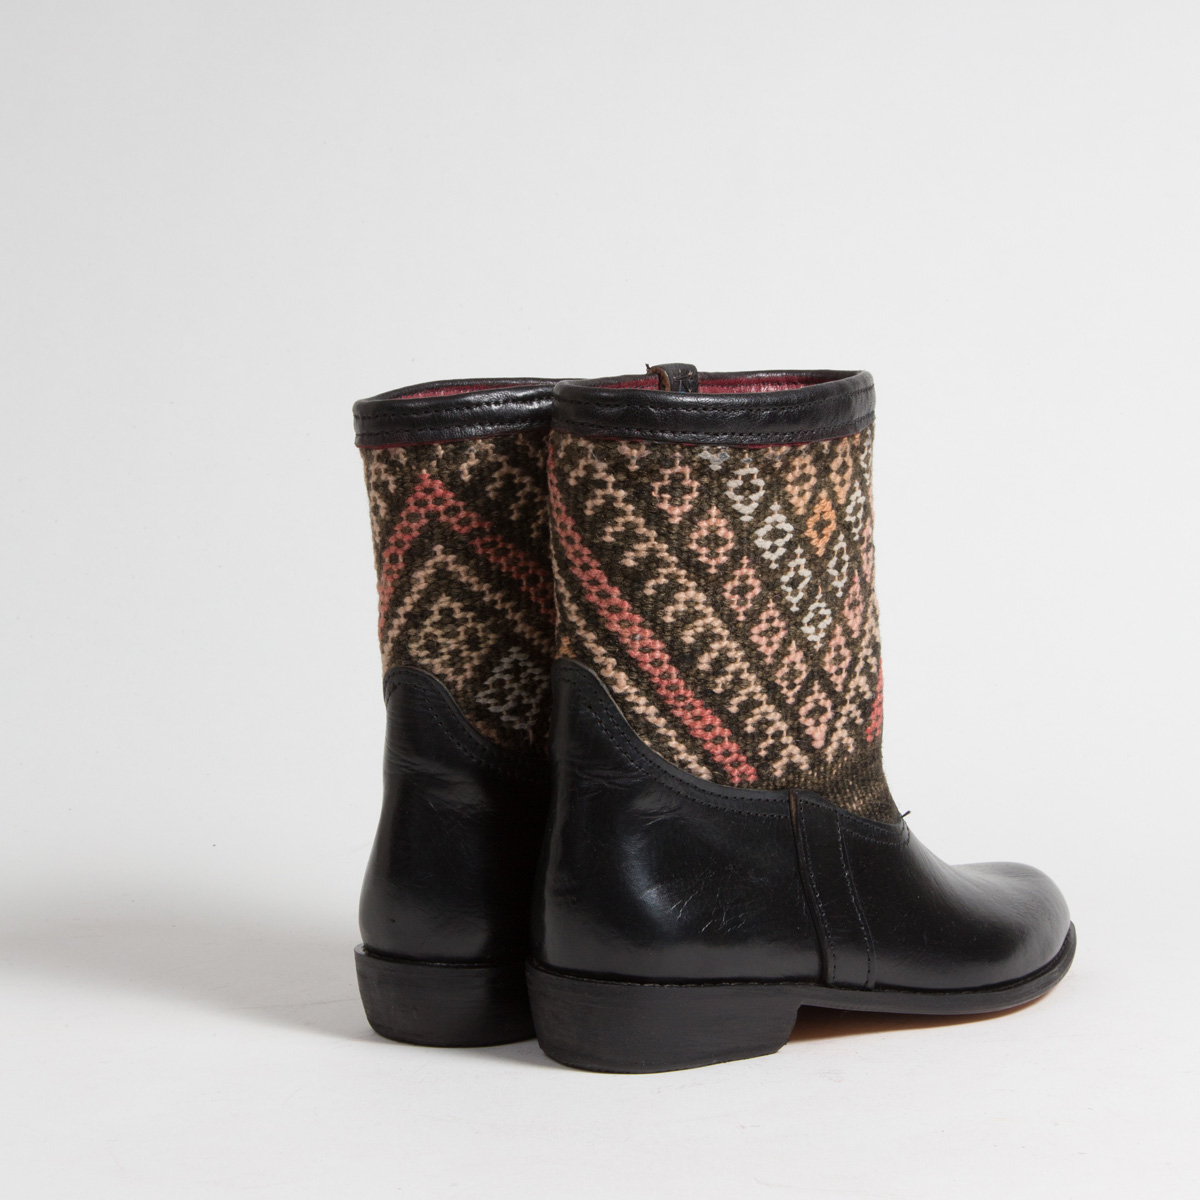 Bottines Kilim cuir mababouche artisanales (Réf. RPN23-40)